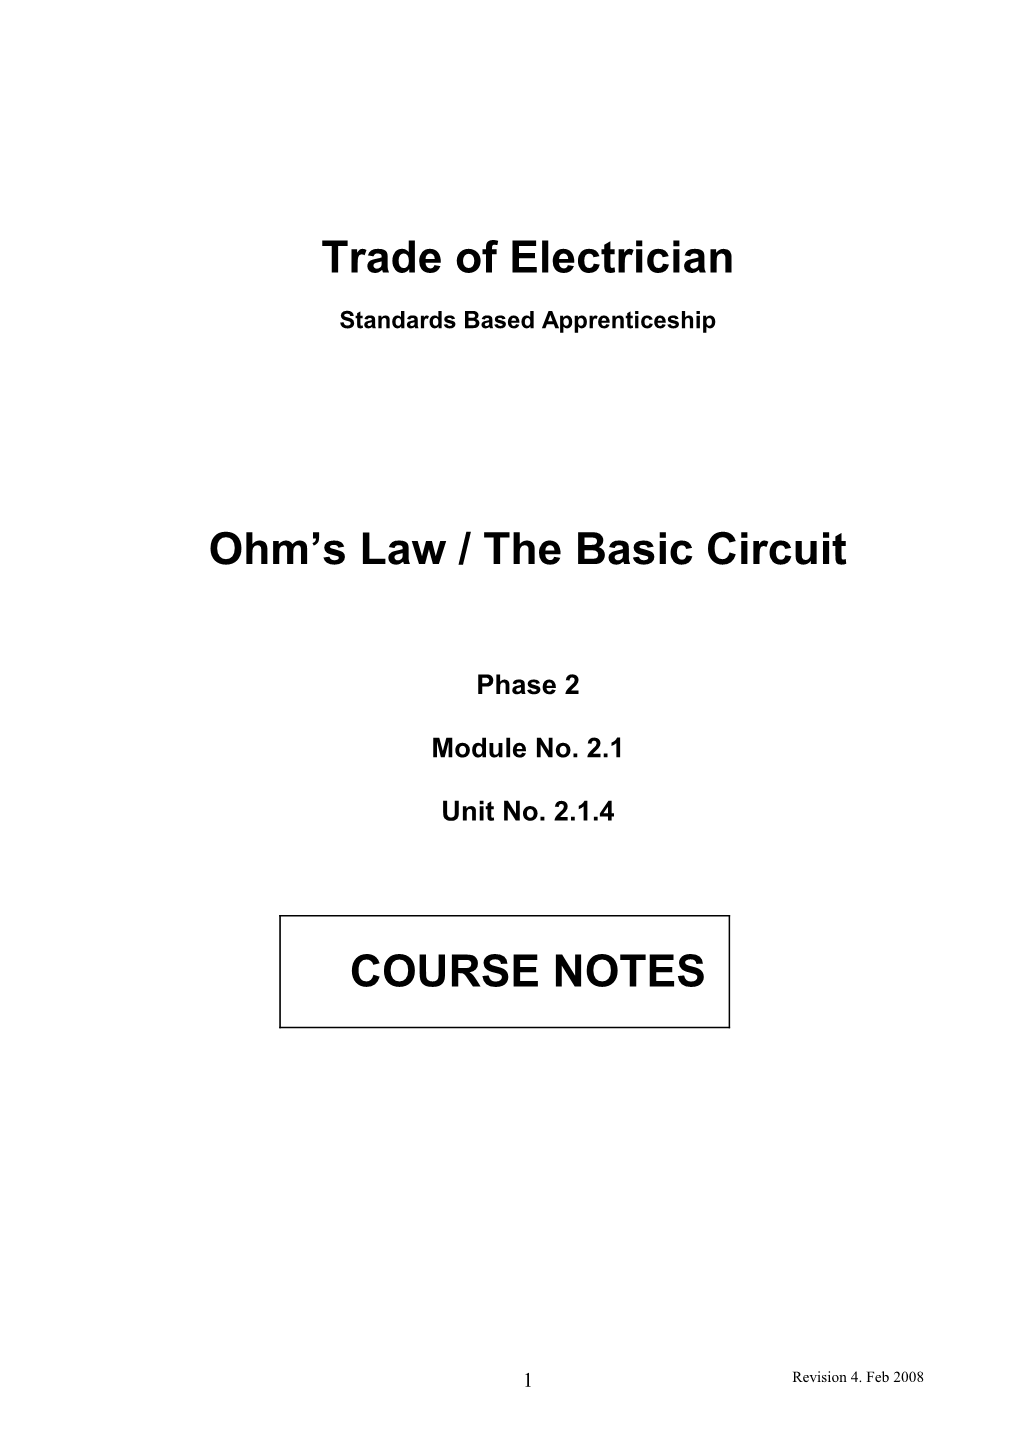 Ohm S Law / the Basic Circuit